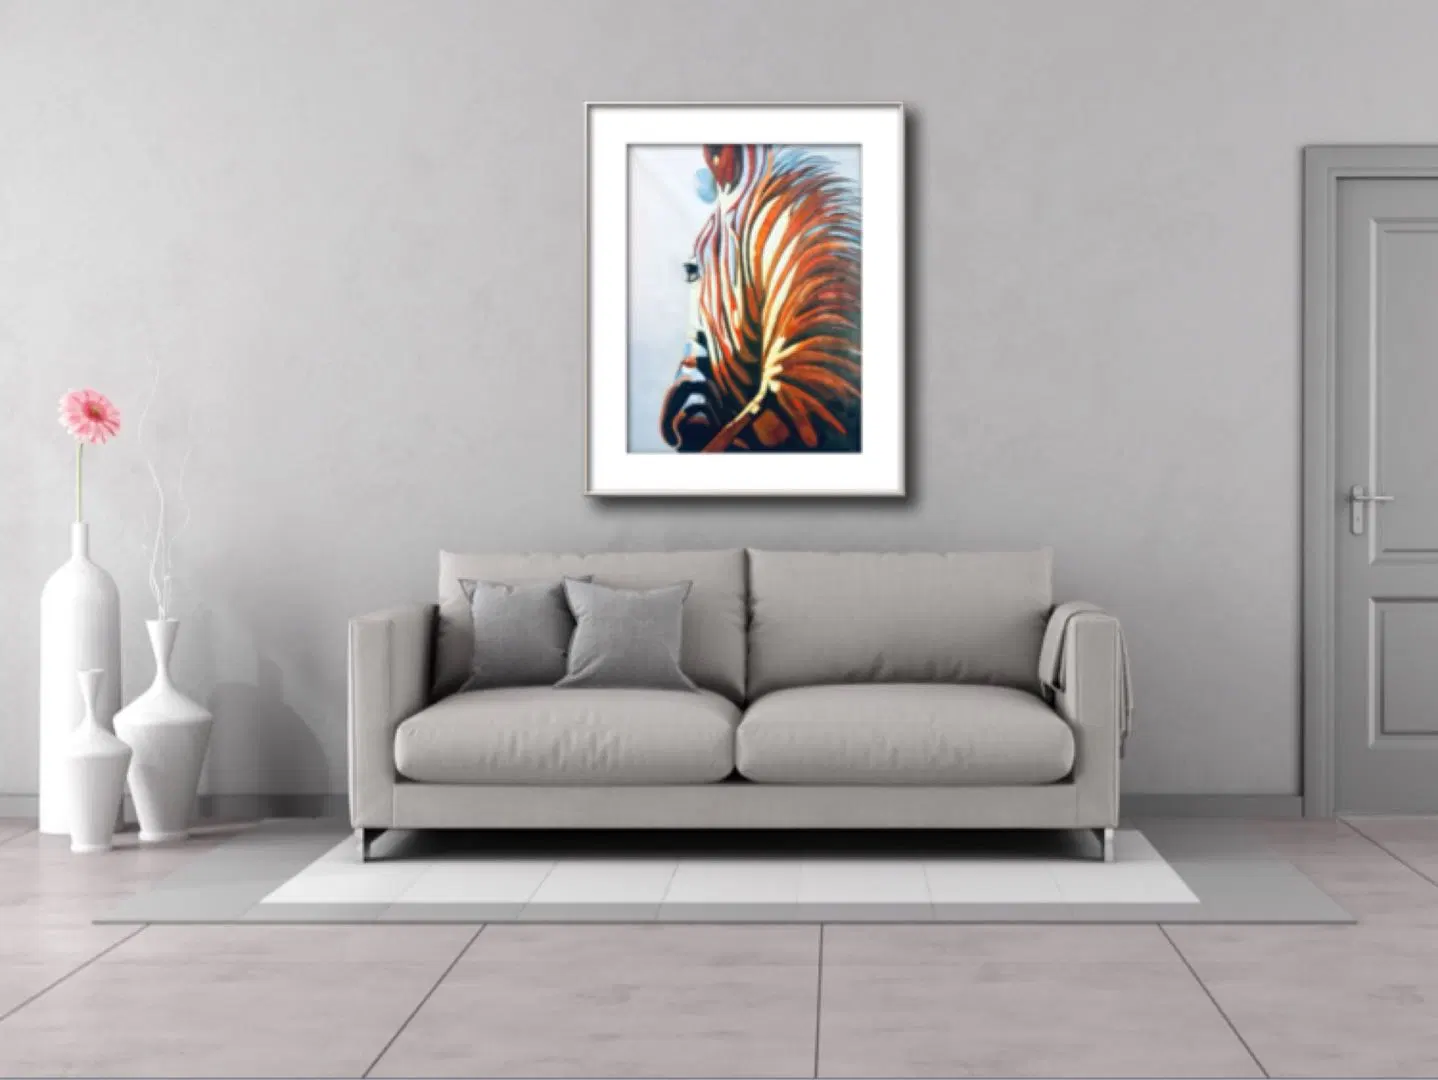 Reproduced Zebra Canvas Oil Painting for Wall Decoration